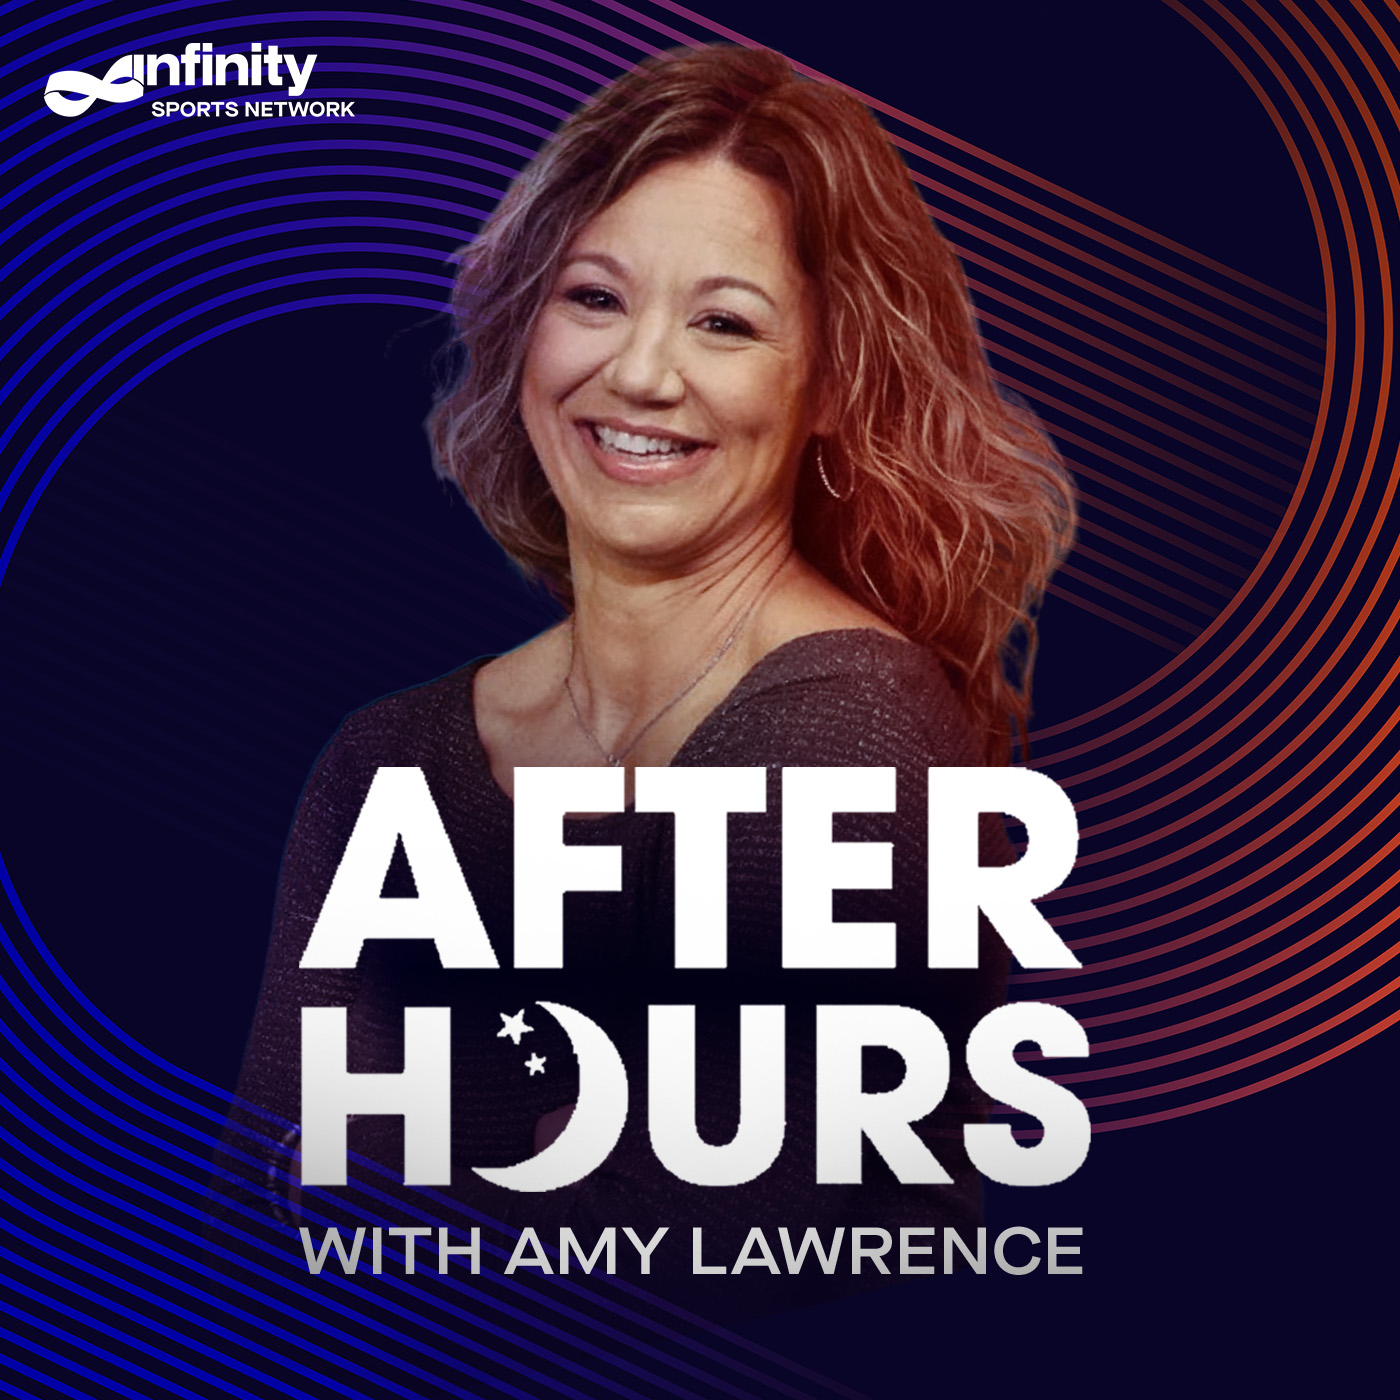 6/14/21 After Hours with Amy Lawrence PODCAST: Hour 3